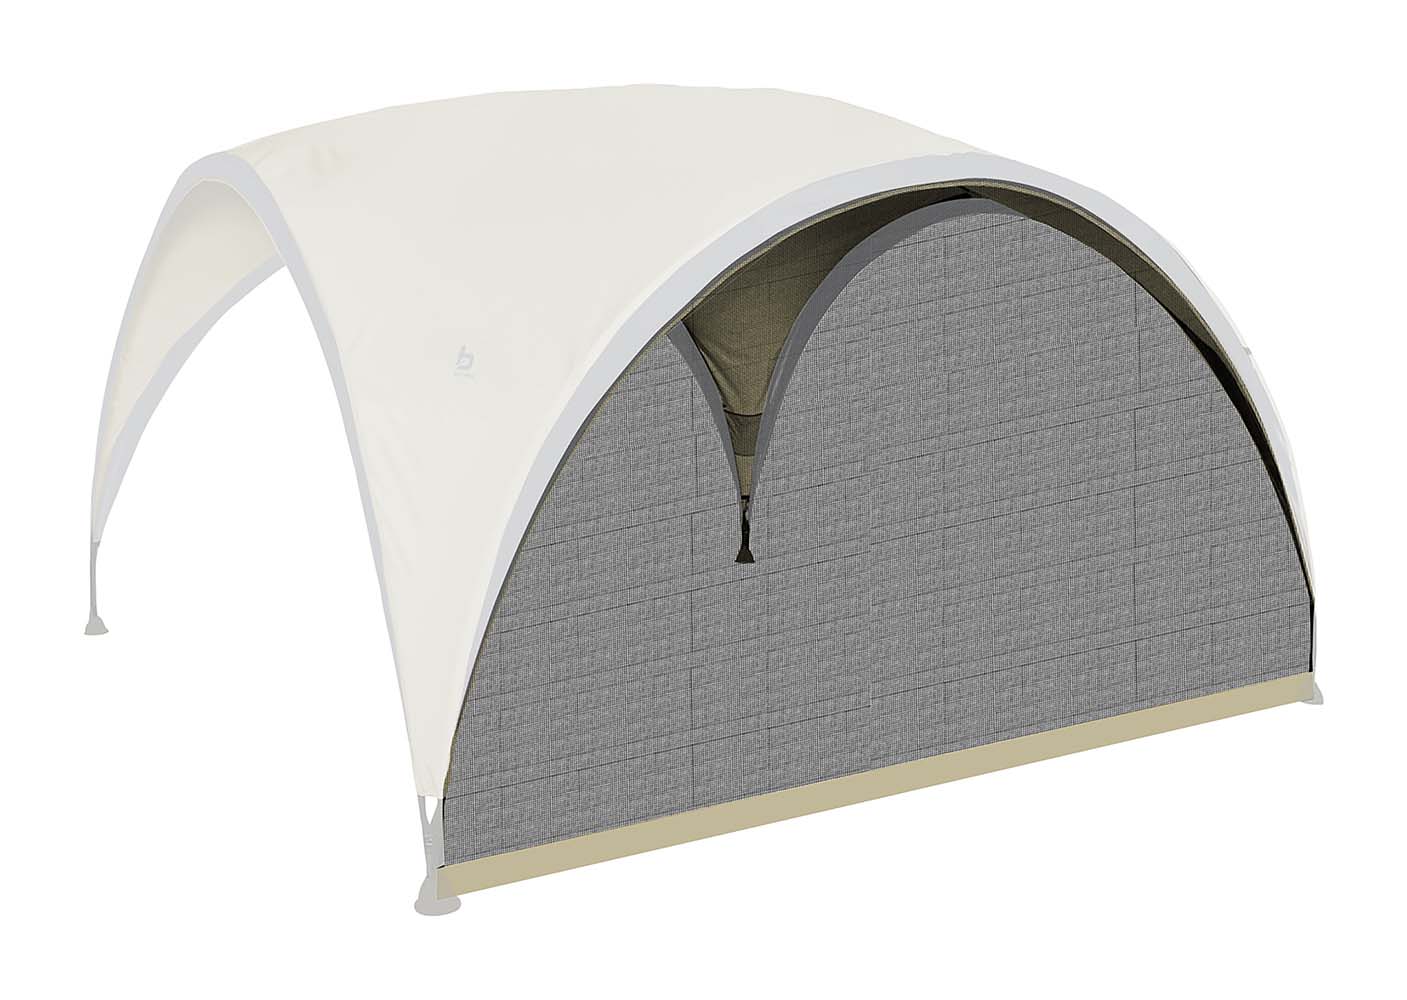 4472215 Bo-Camp - Sidewall - Carpa para fiestas - Large - Con pared lateral de red